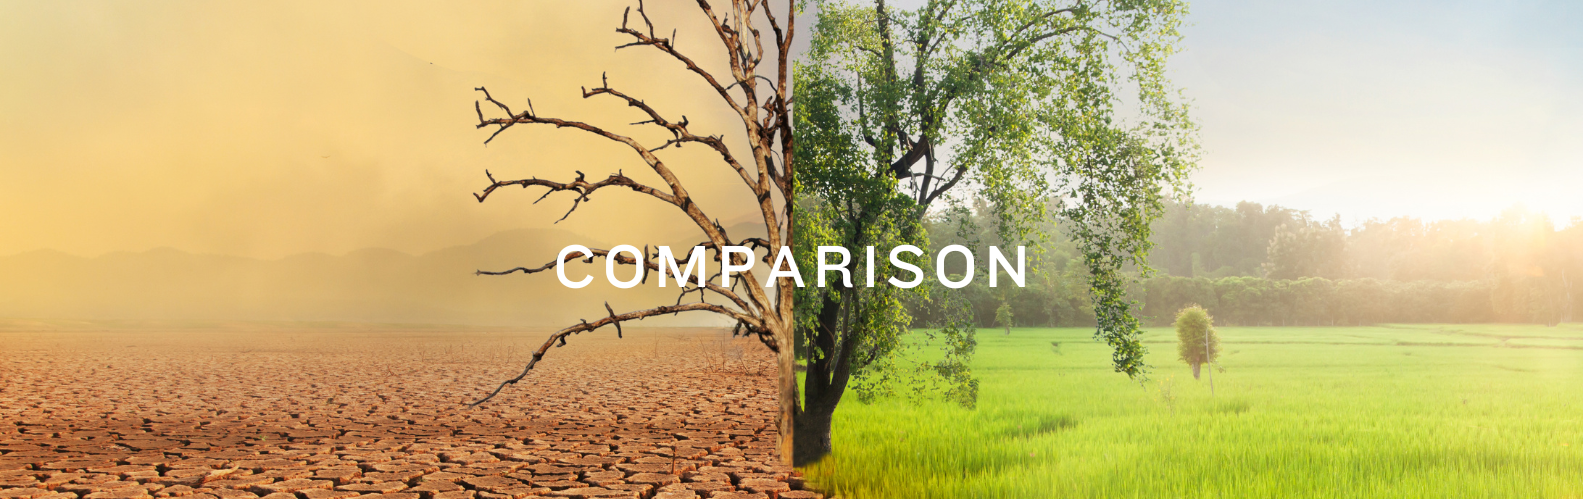 Are You Falling For the Comparison Trap?